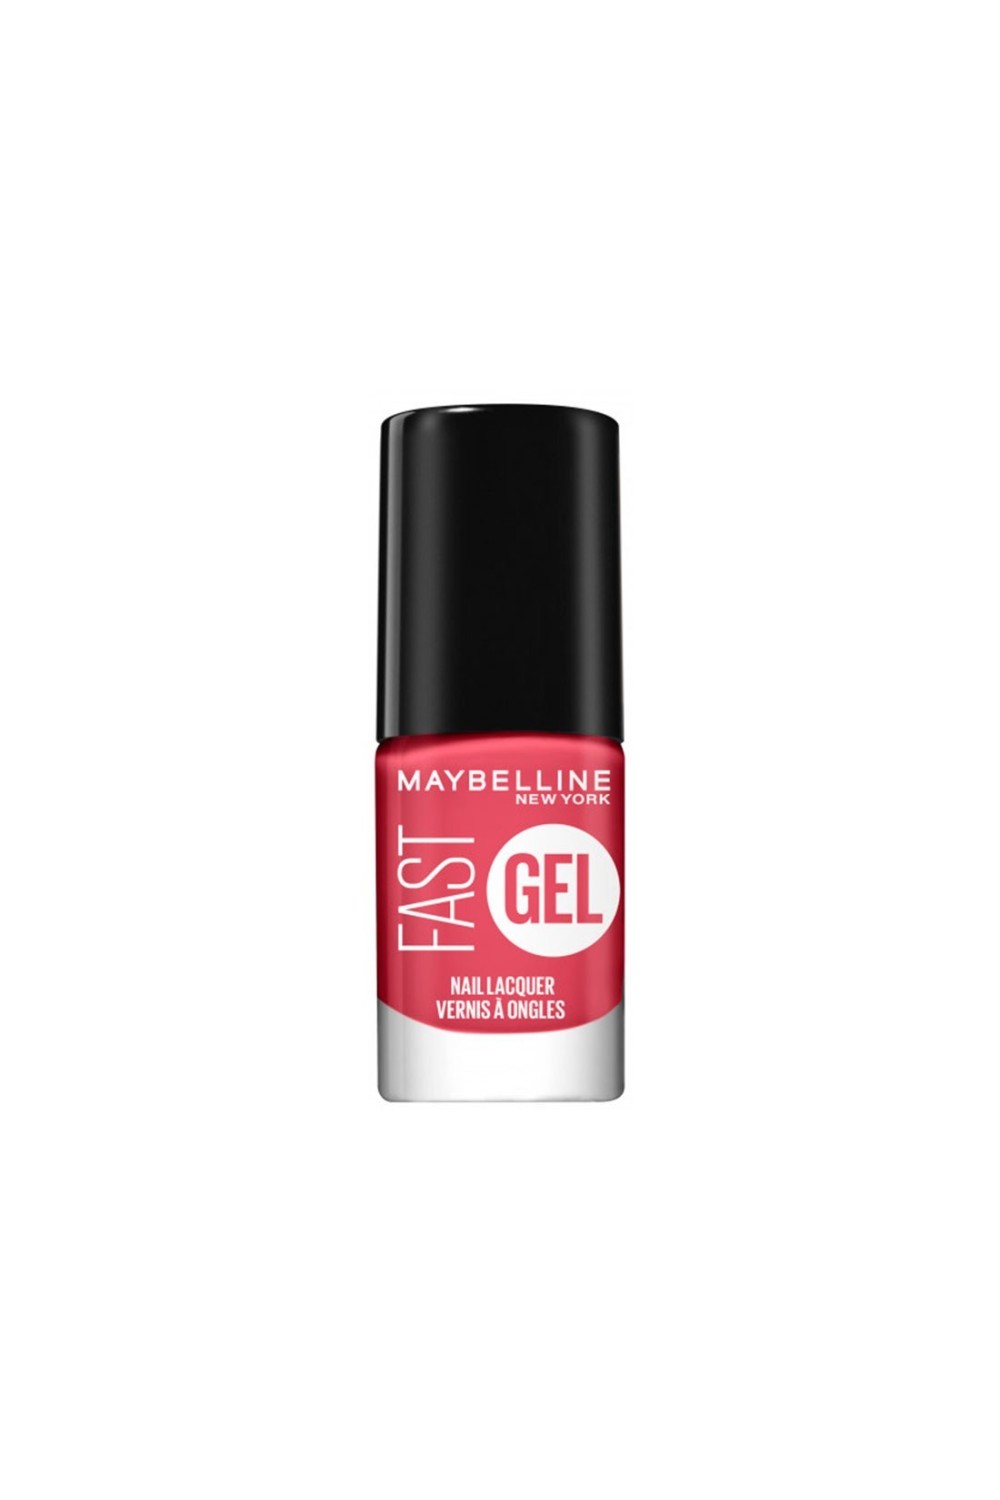 Maybelline Fast Gel Nail Lacquer 06-Orange Shot